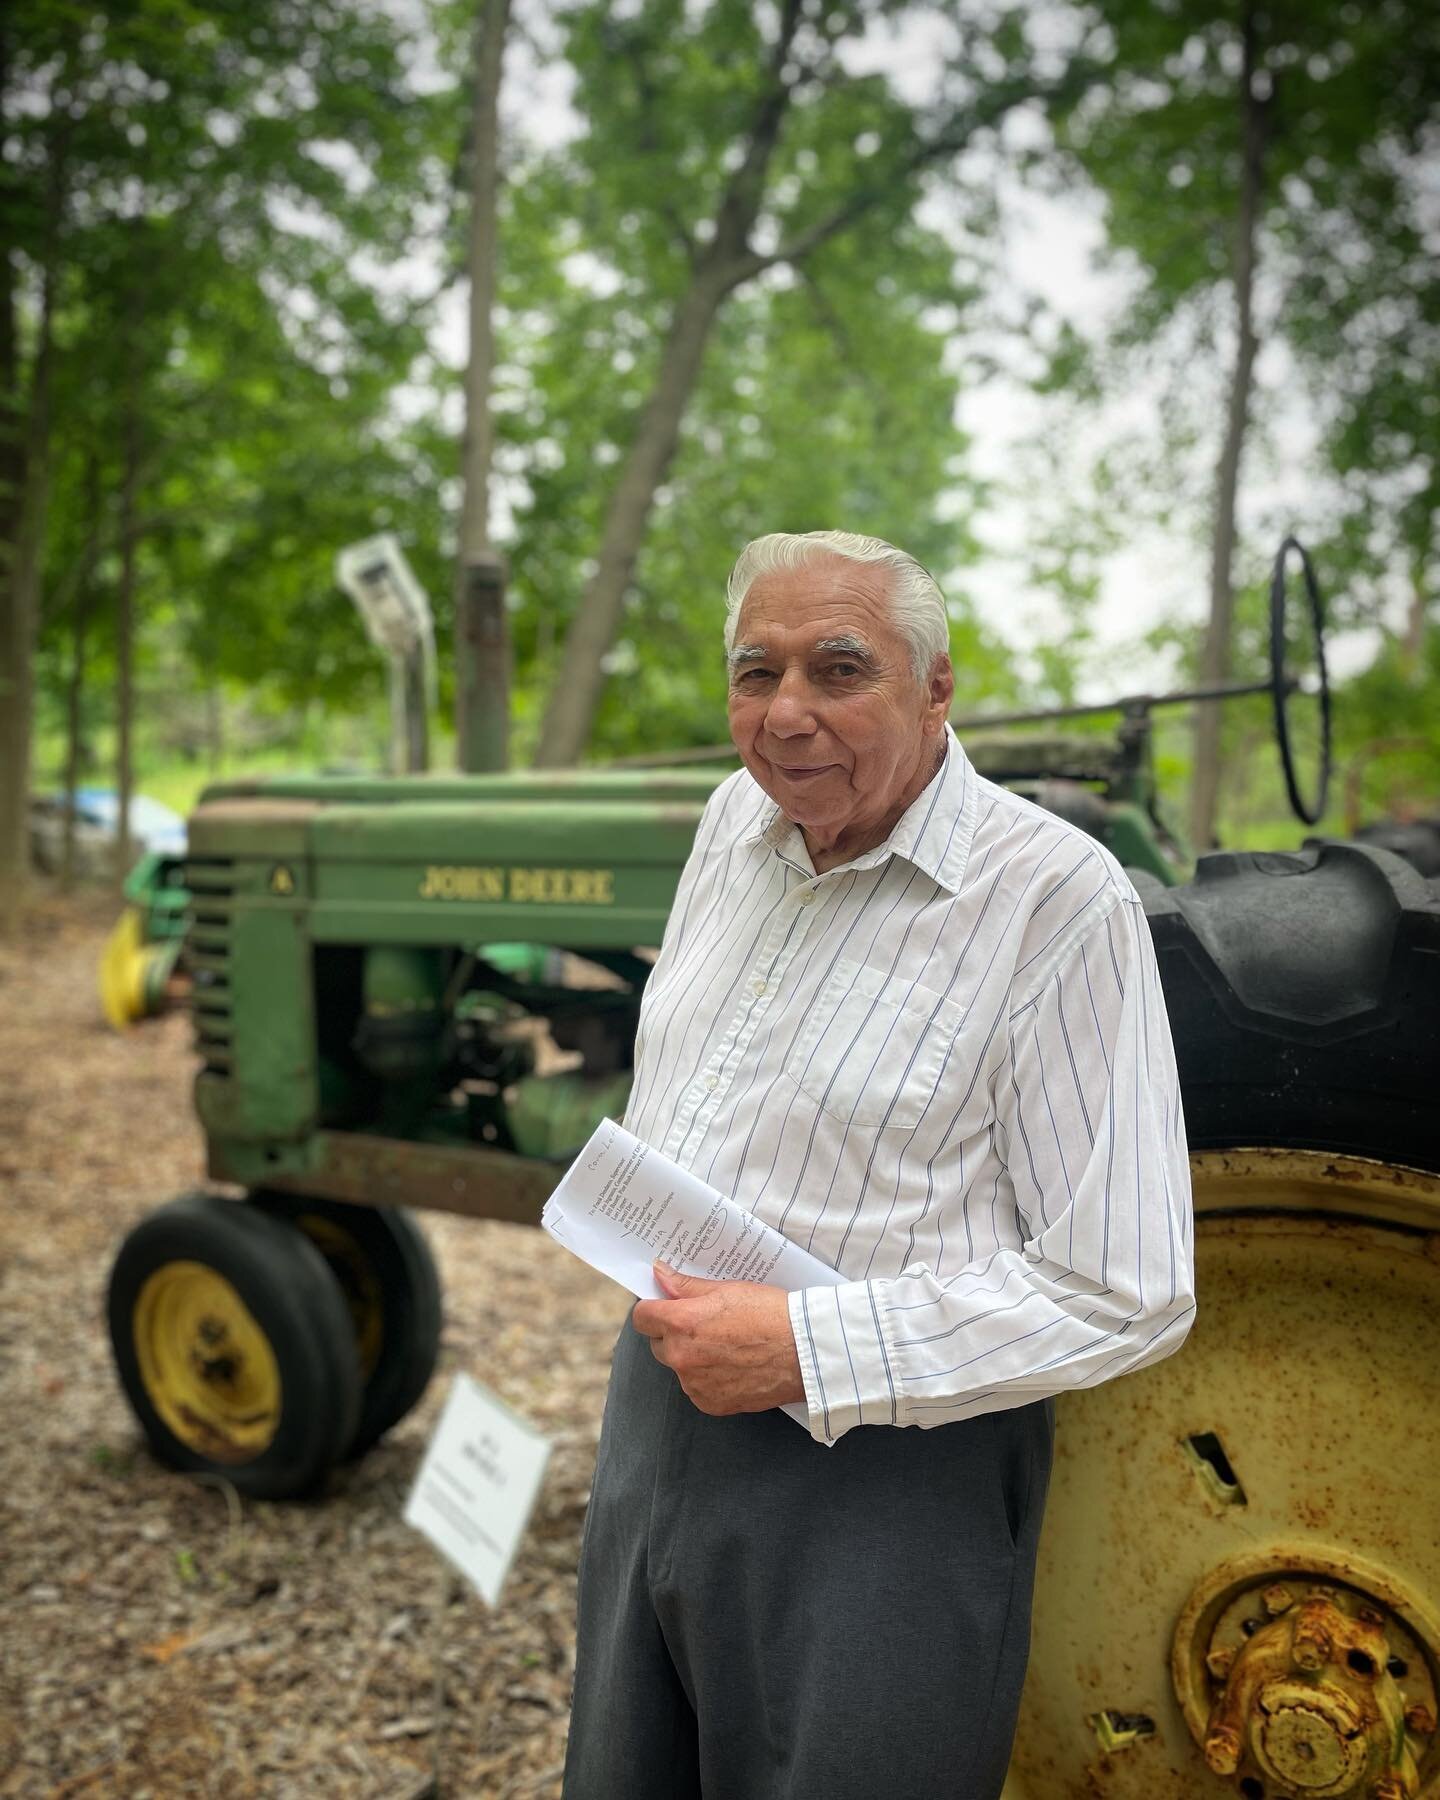 This morning Harold cut the ribbon to open the new Antique Farm Equipment Outdoor Museum at Old Rockville in @townofwallkill organized and instigated  by the the Town of Wallkill Historical Society. Congratulations, Harold, on a beautiful achievement